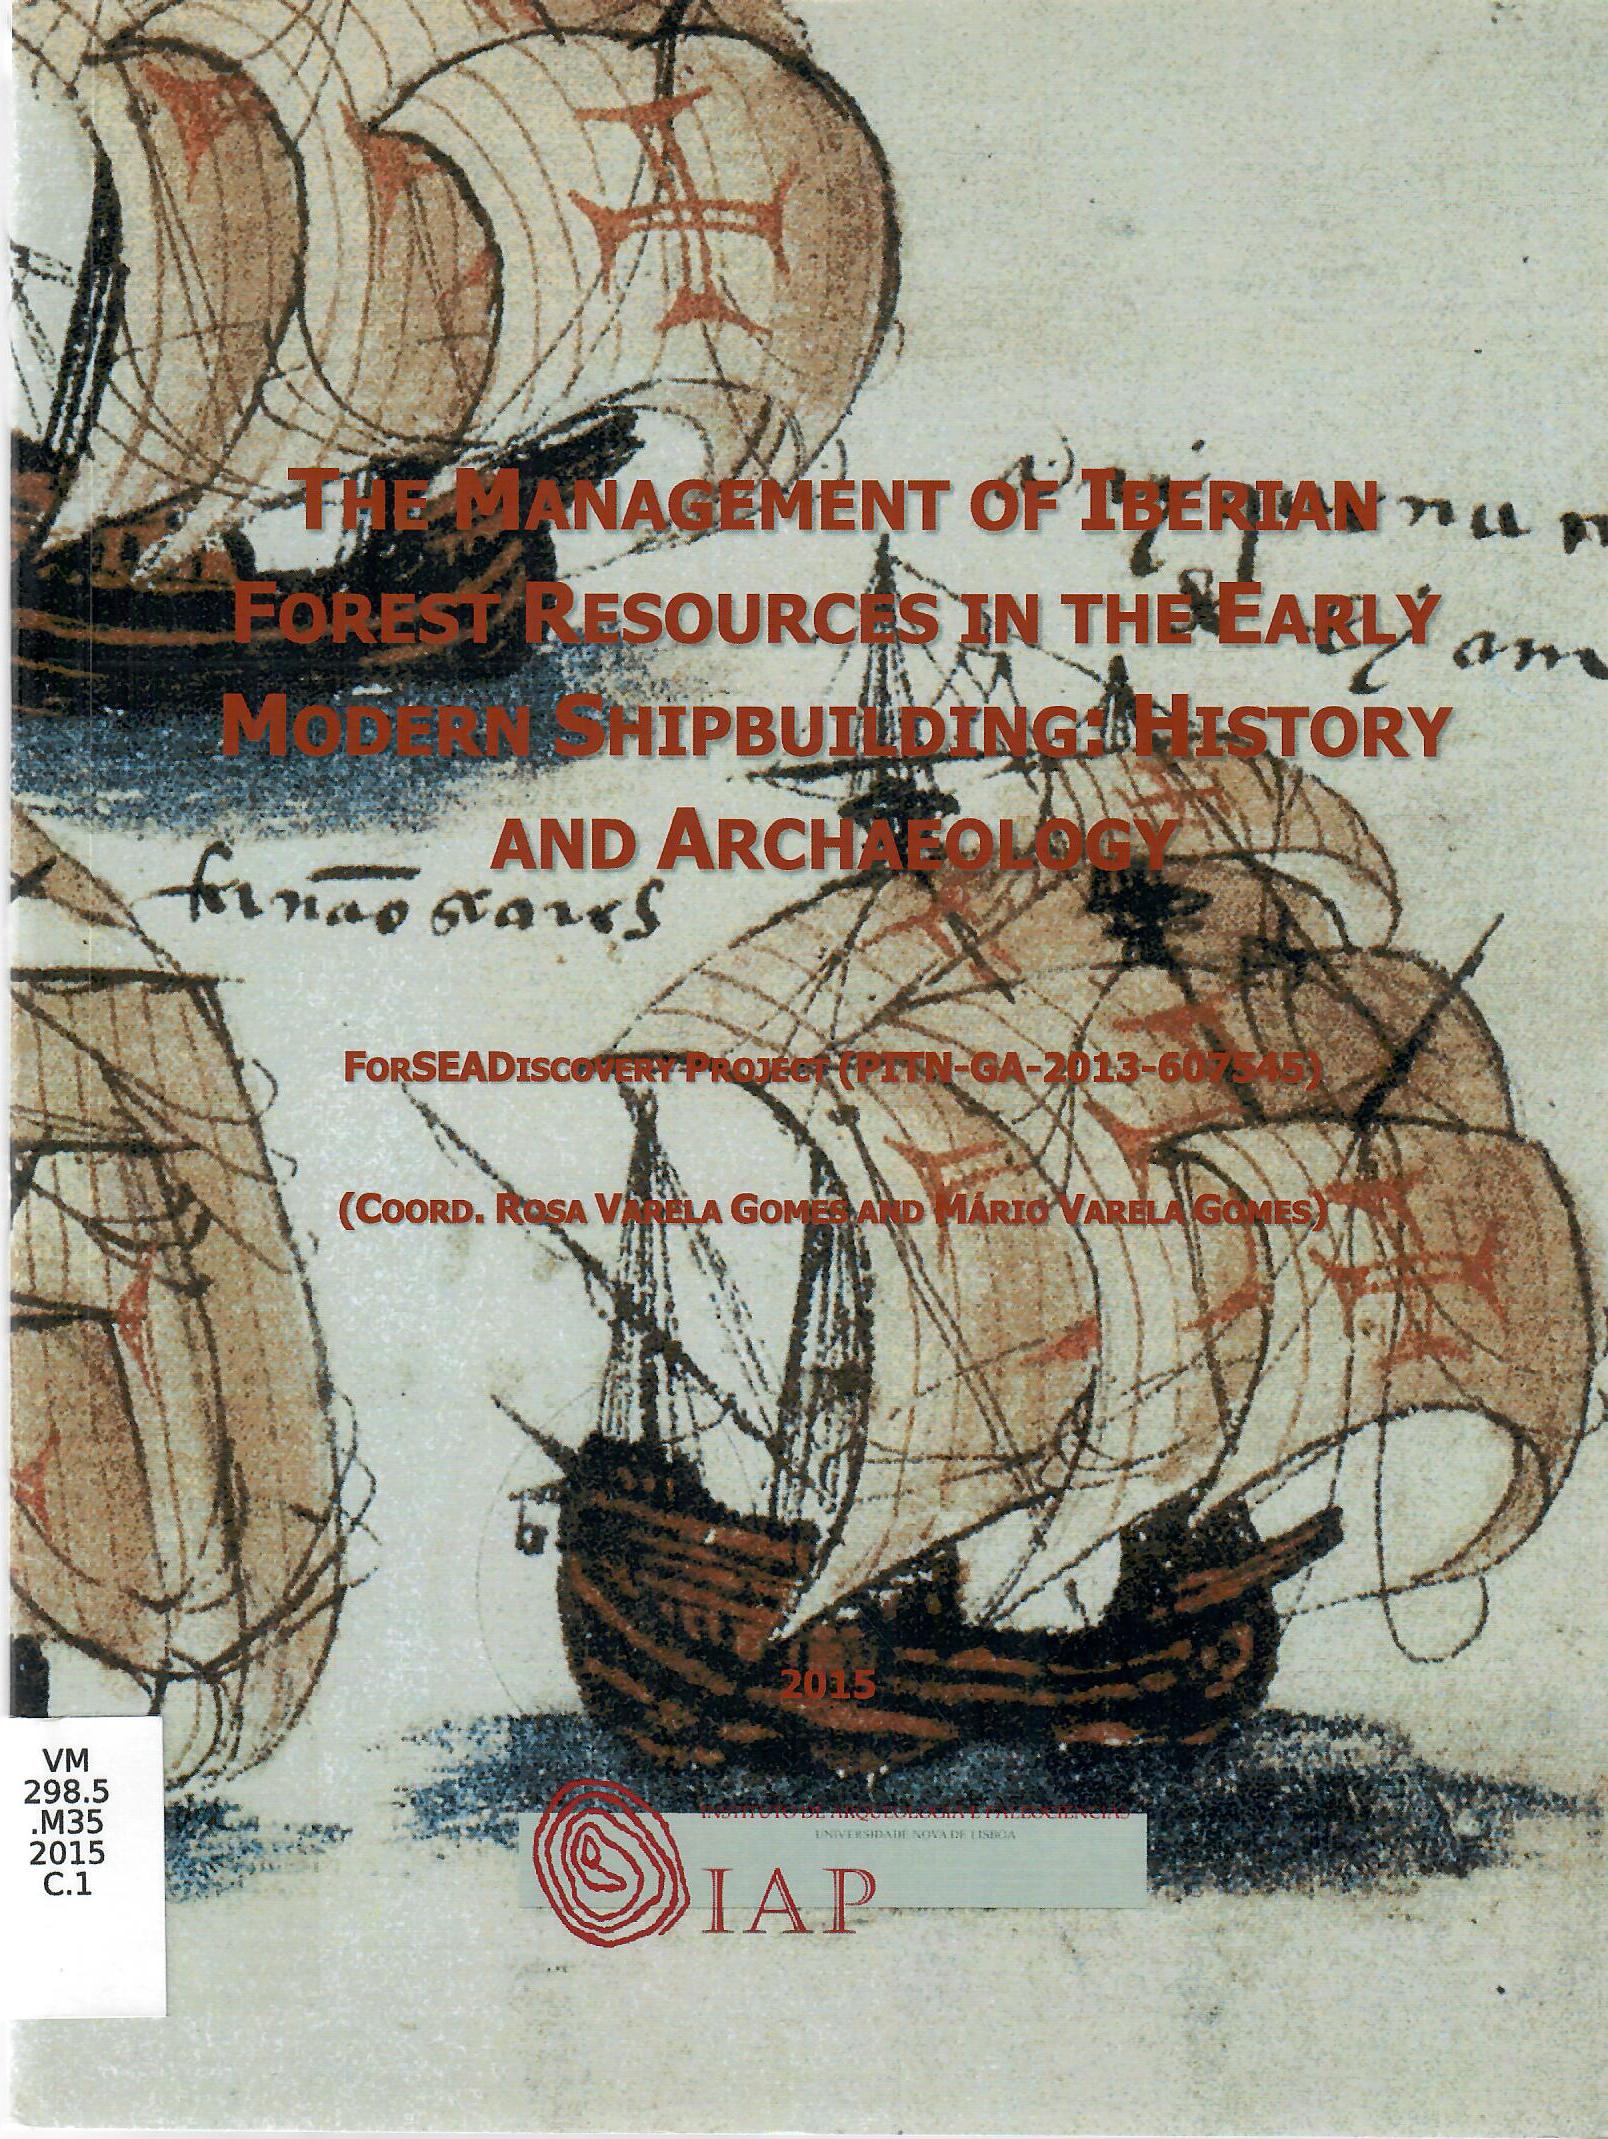 THE MANAGEMENT OF IBERIAN FOREST RESOURCES IN THE EARLY MODERN SHIPBUILDING: HISTORY AND ARCHAEOLOGY